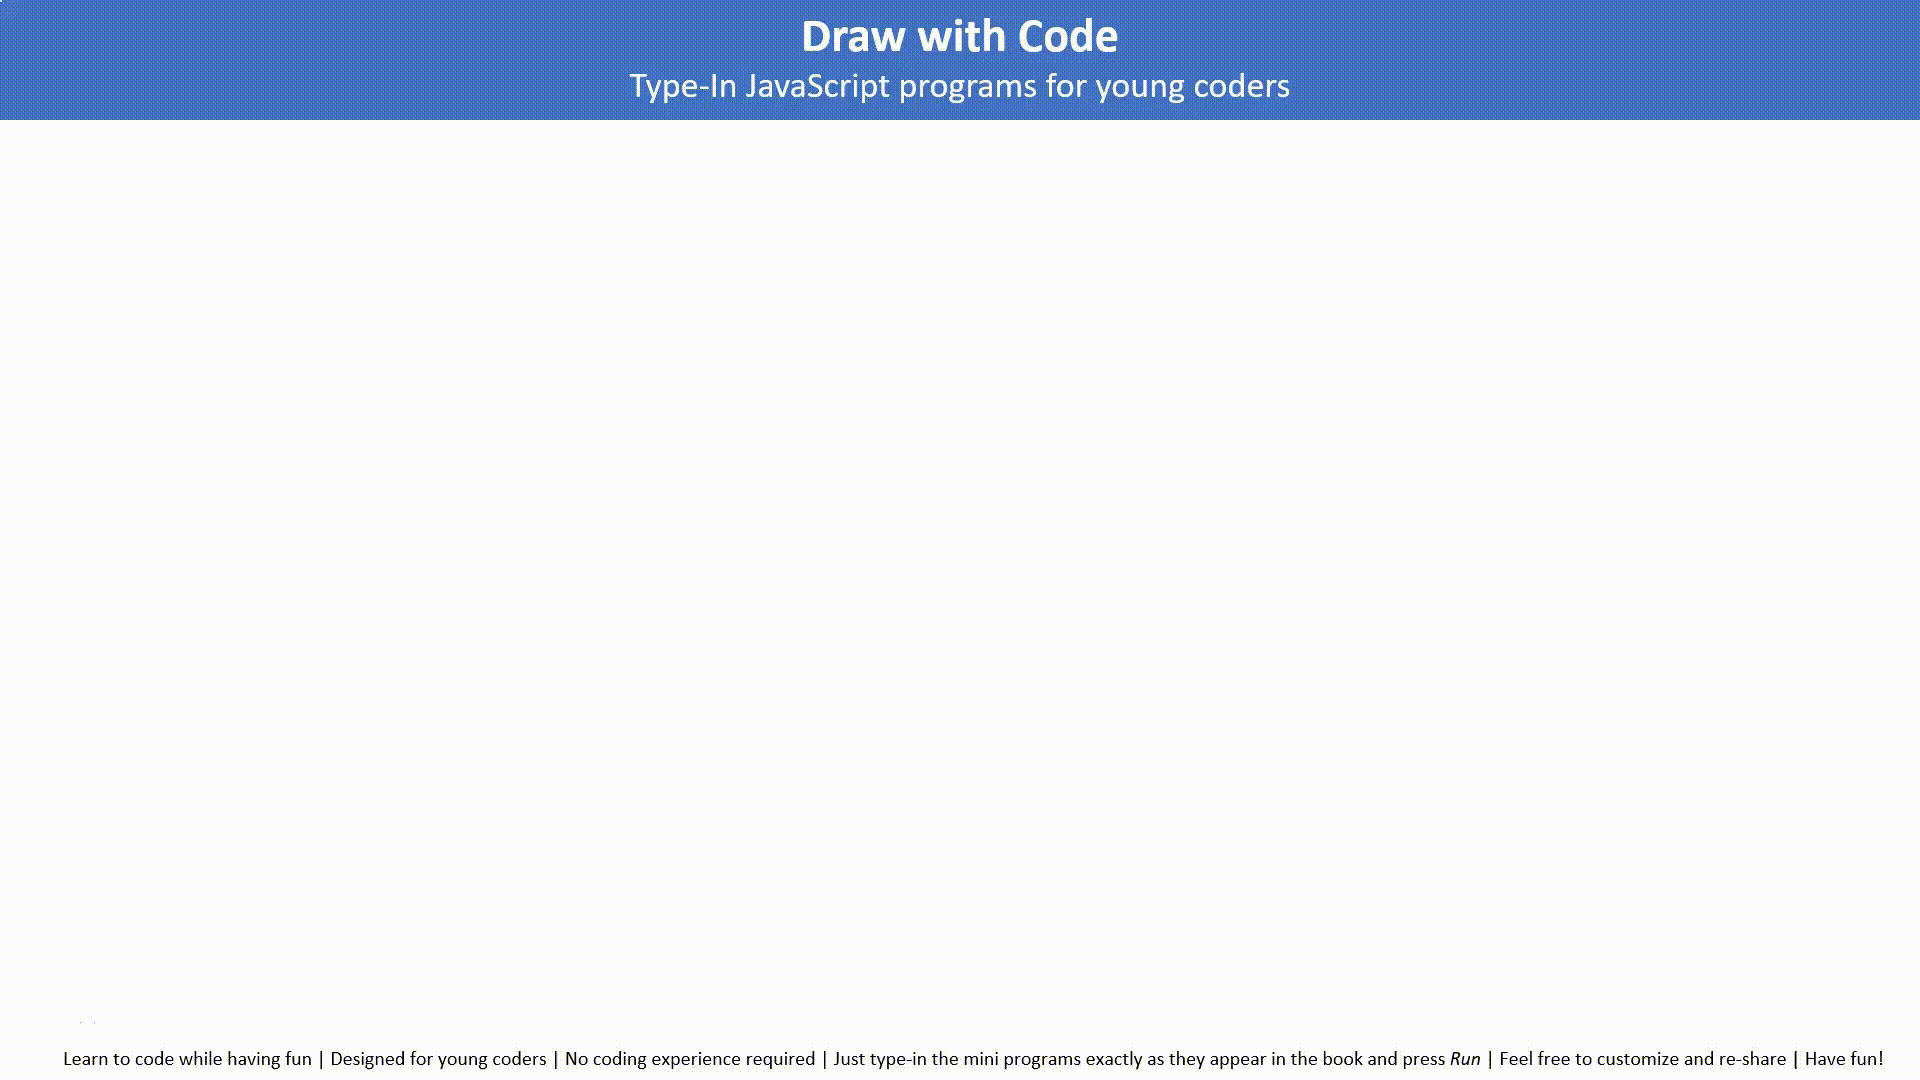 Draw with code